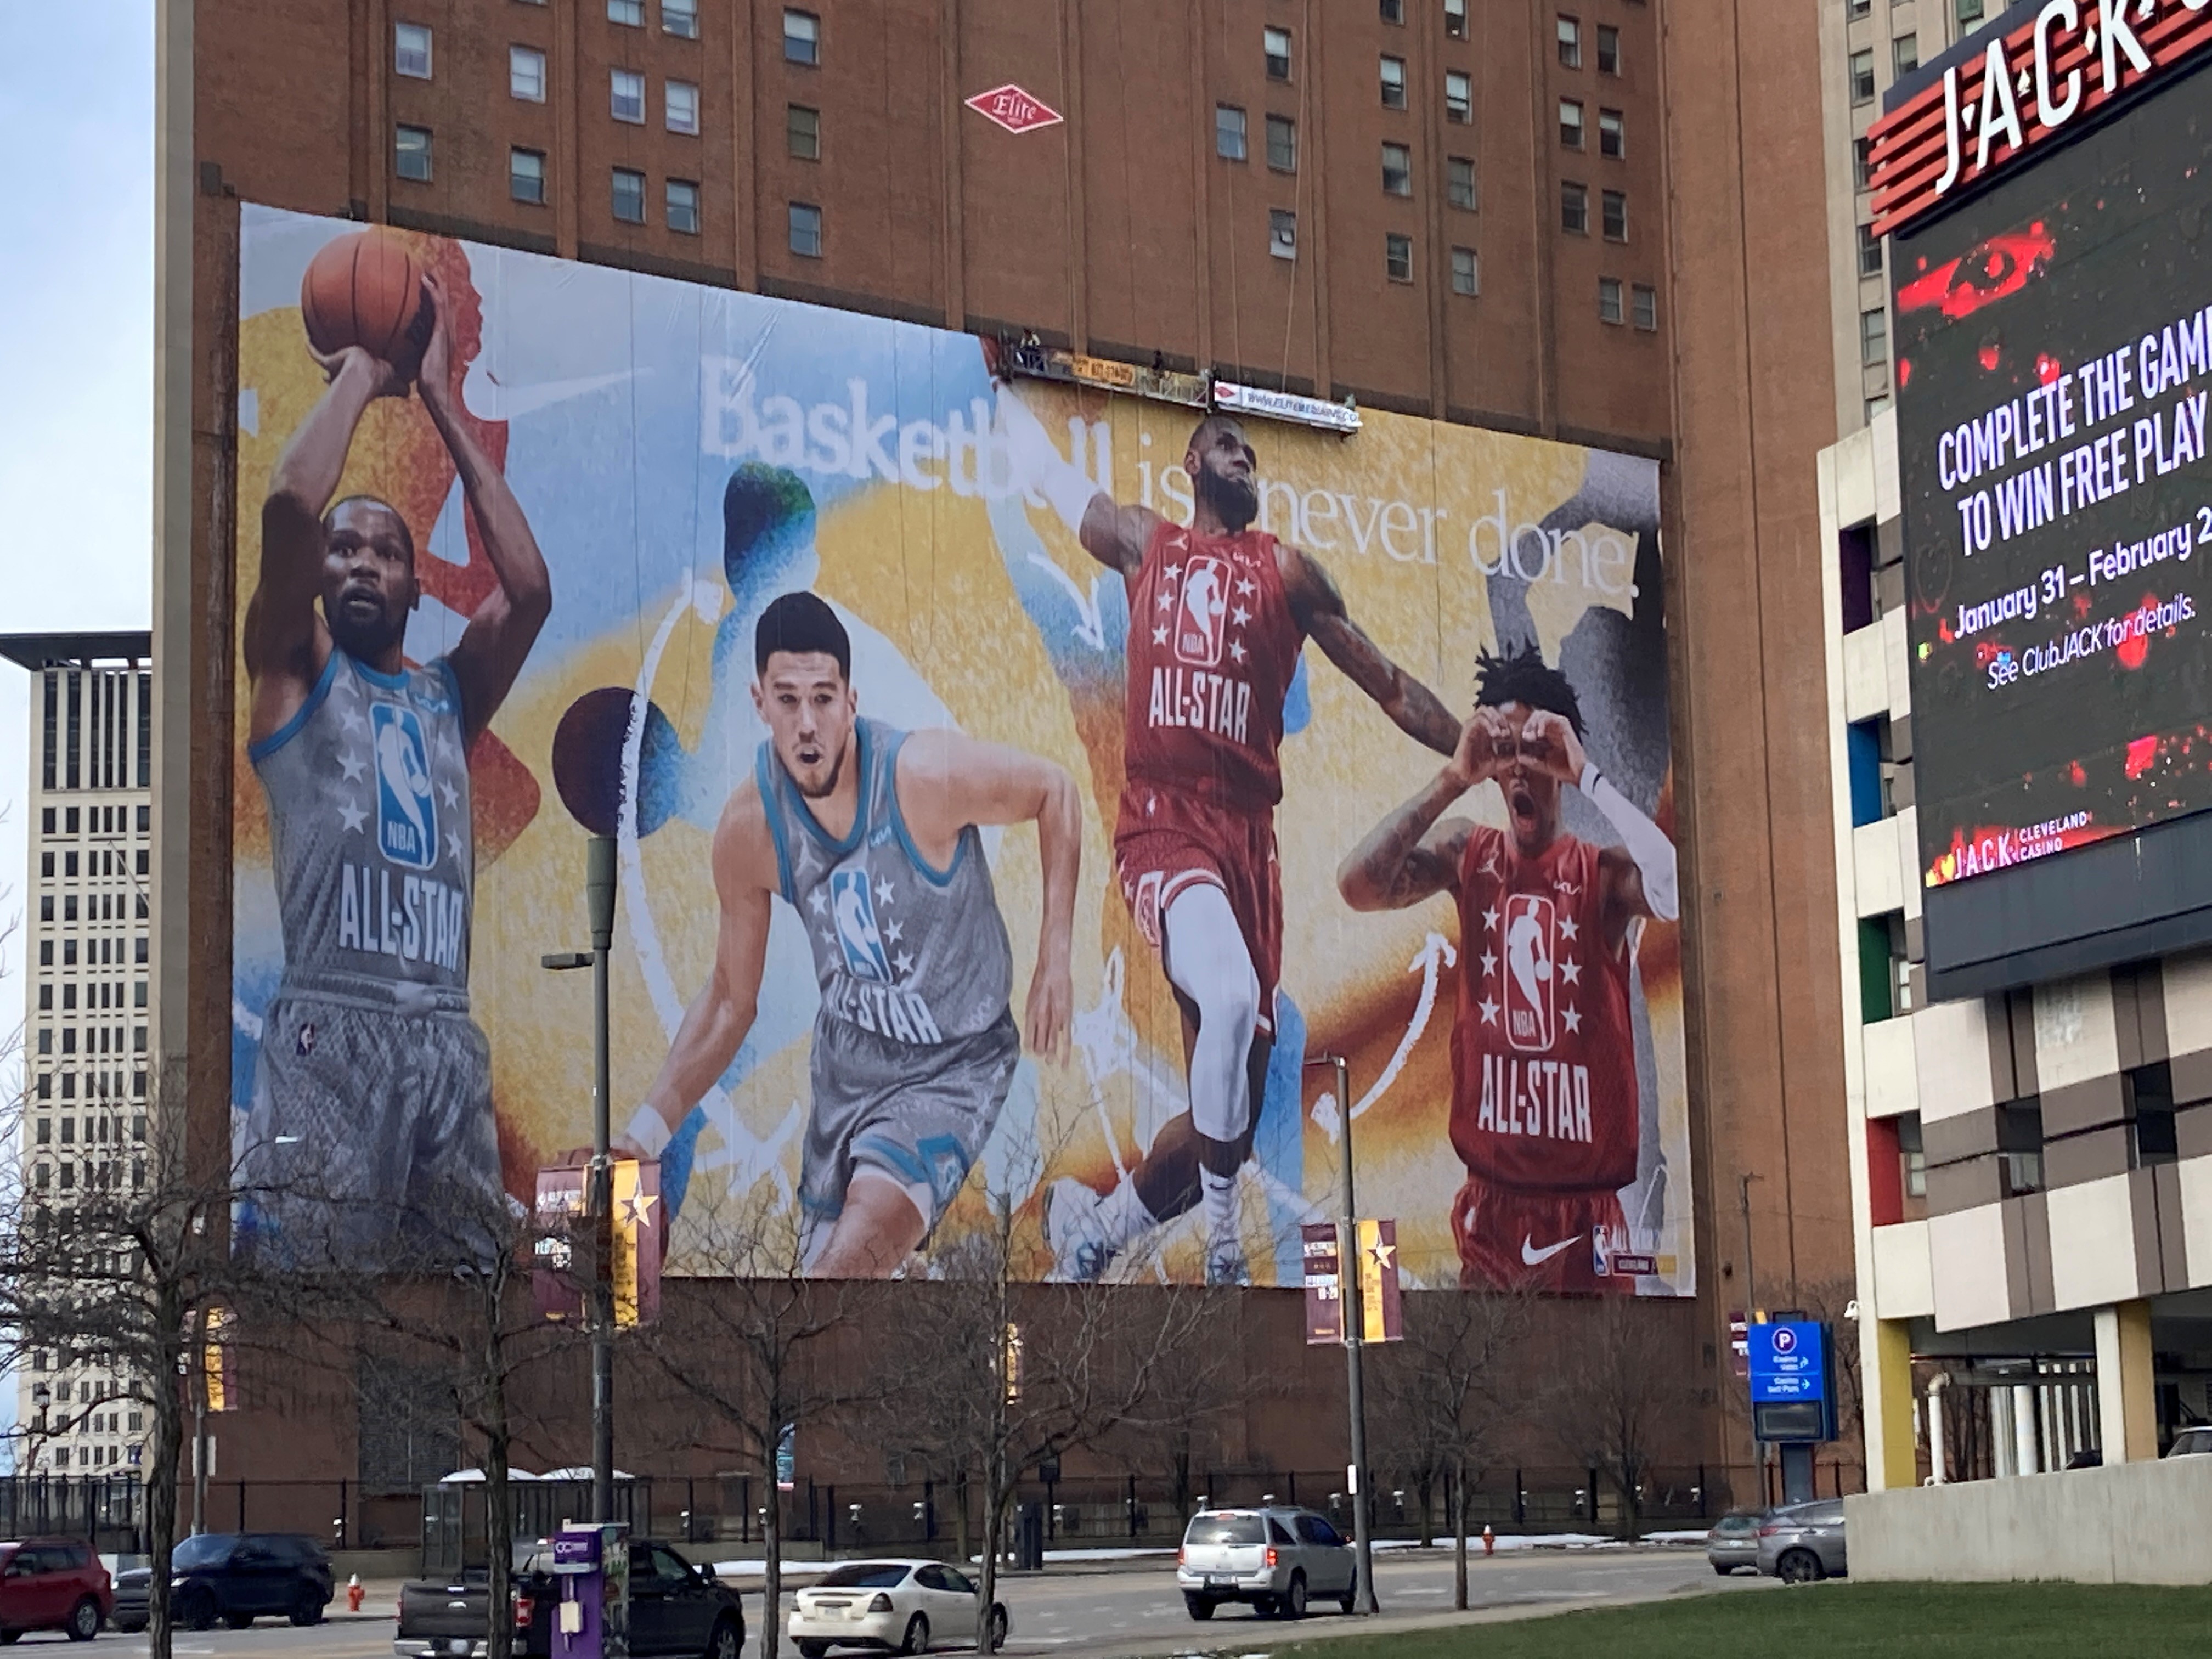 NBA spotlights HBCUs with men's game during All-Star 2022 in Cleveland